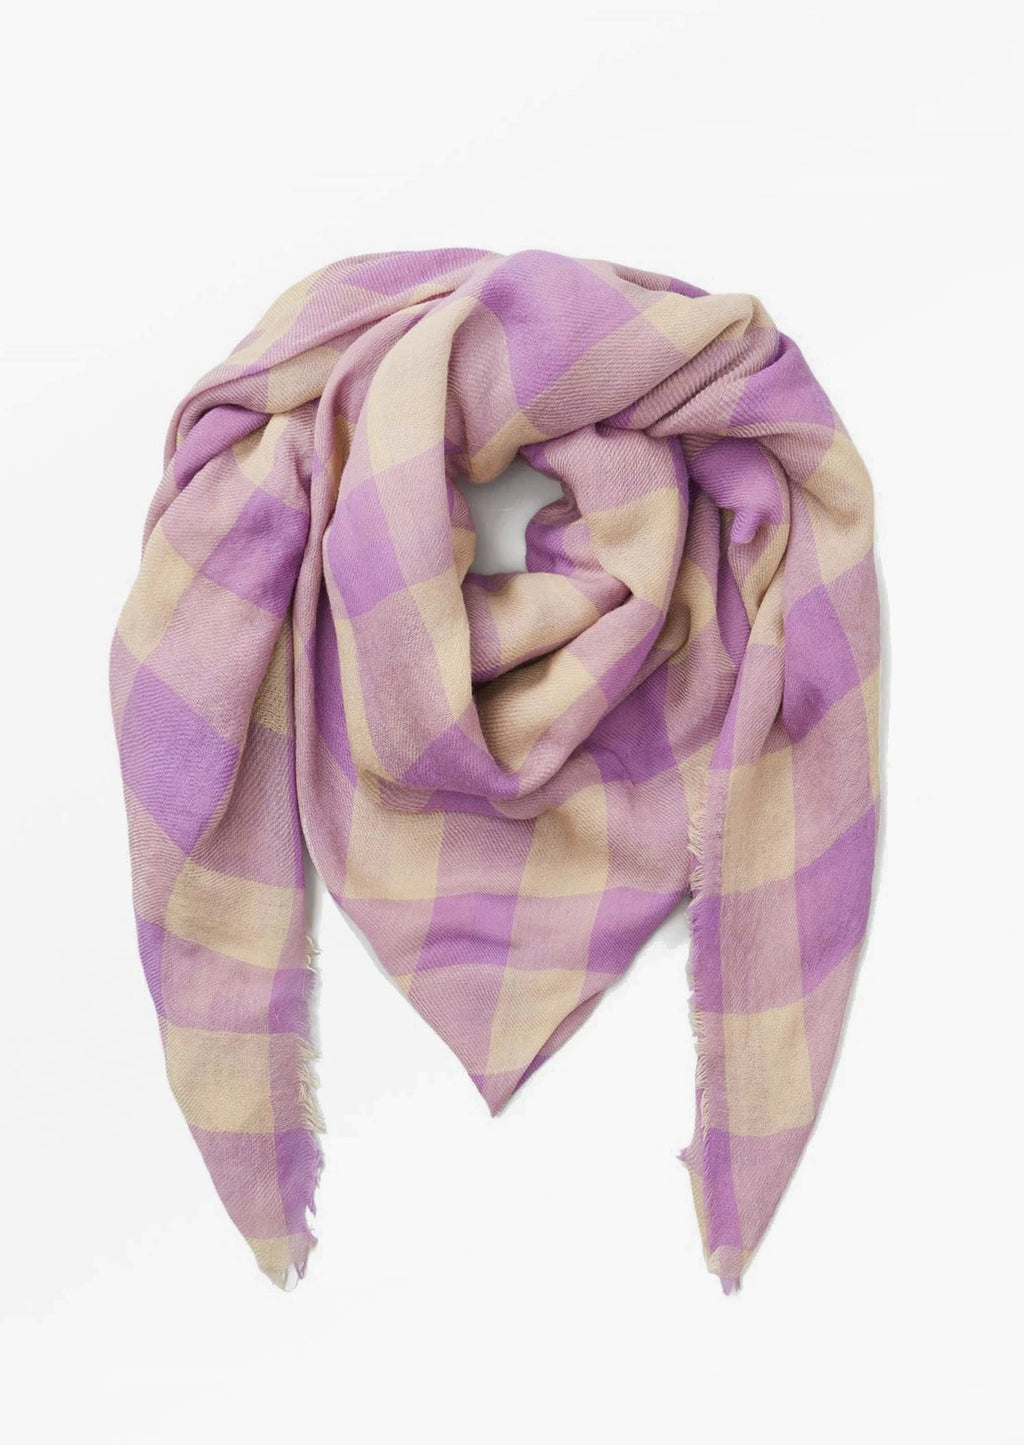 2: A gingham print scarf in purple and tan.